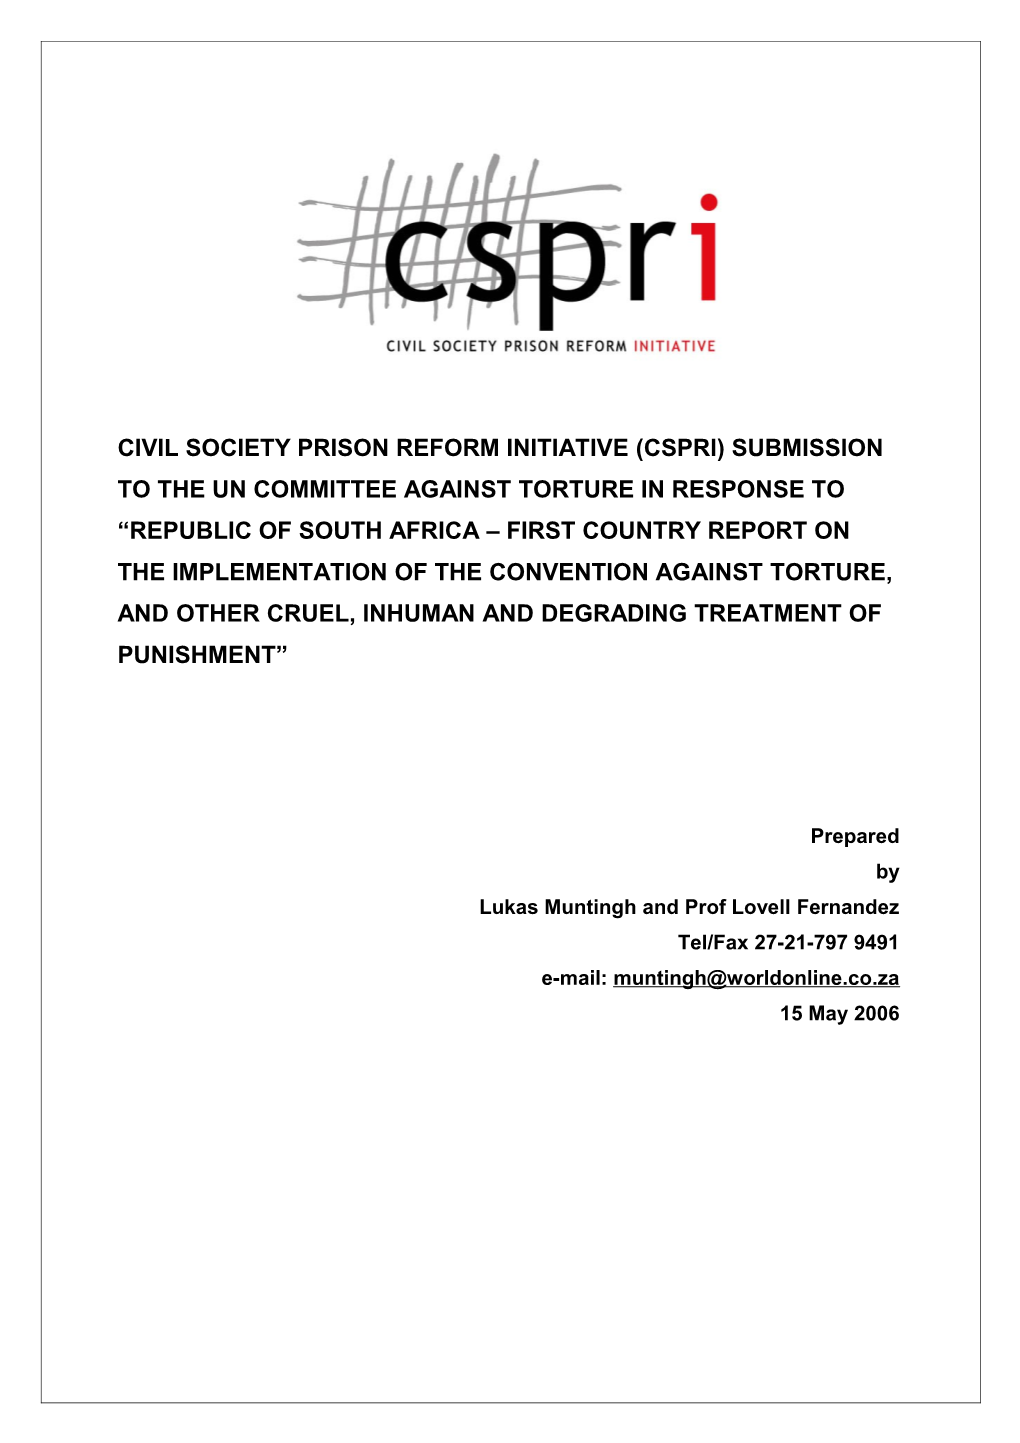 Cspri Submission to the Un Committee Against Torture in Response to Republic of South Africa